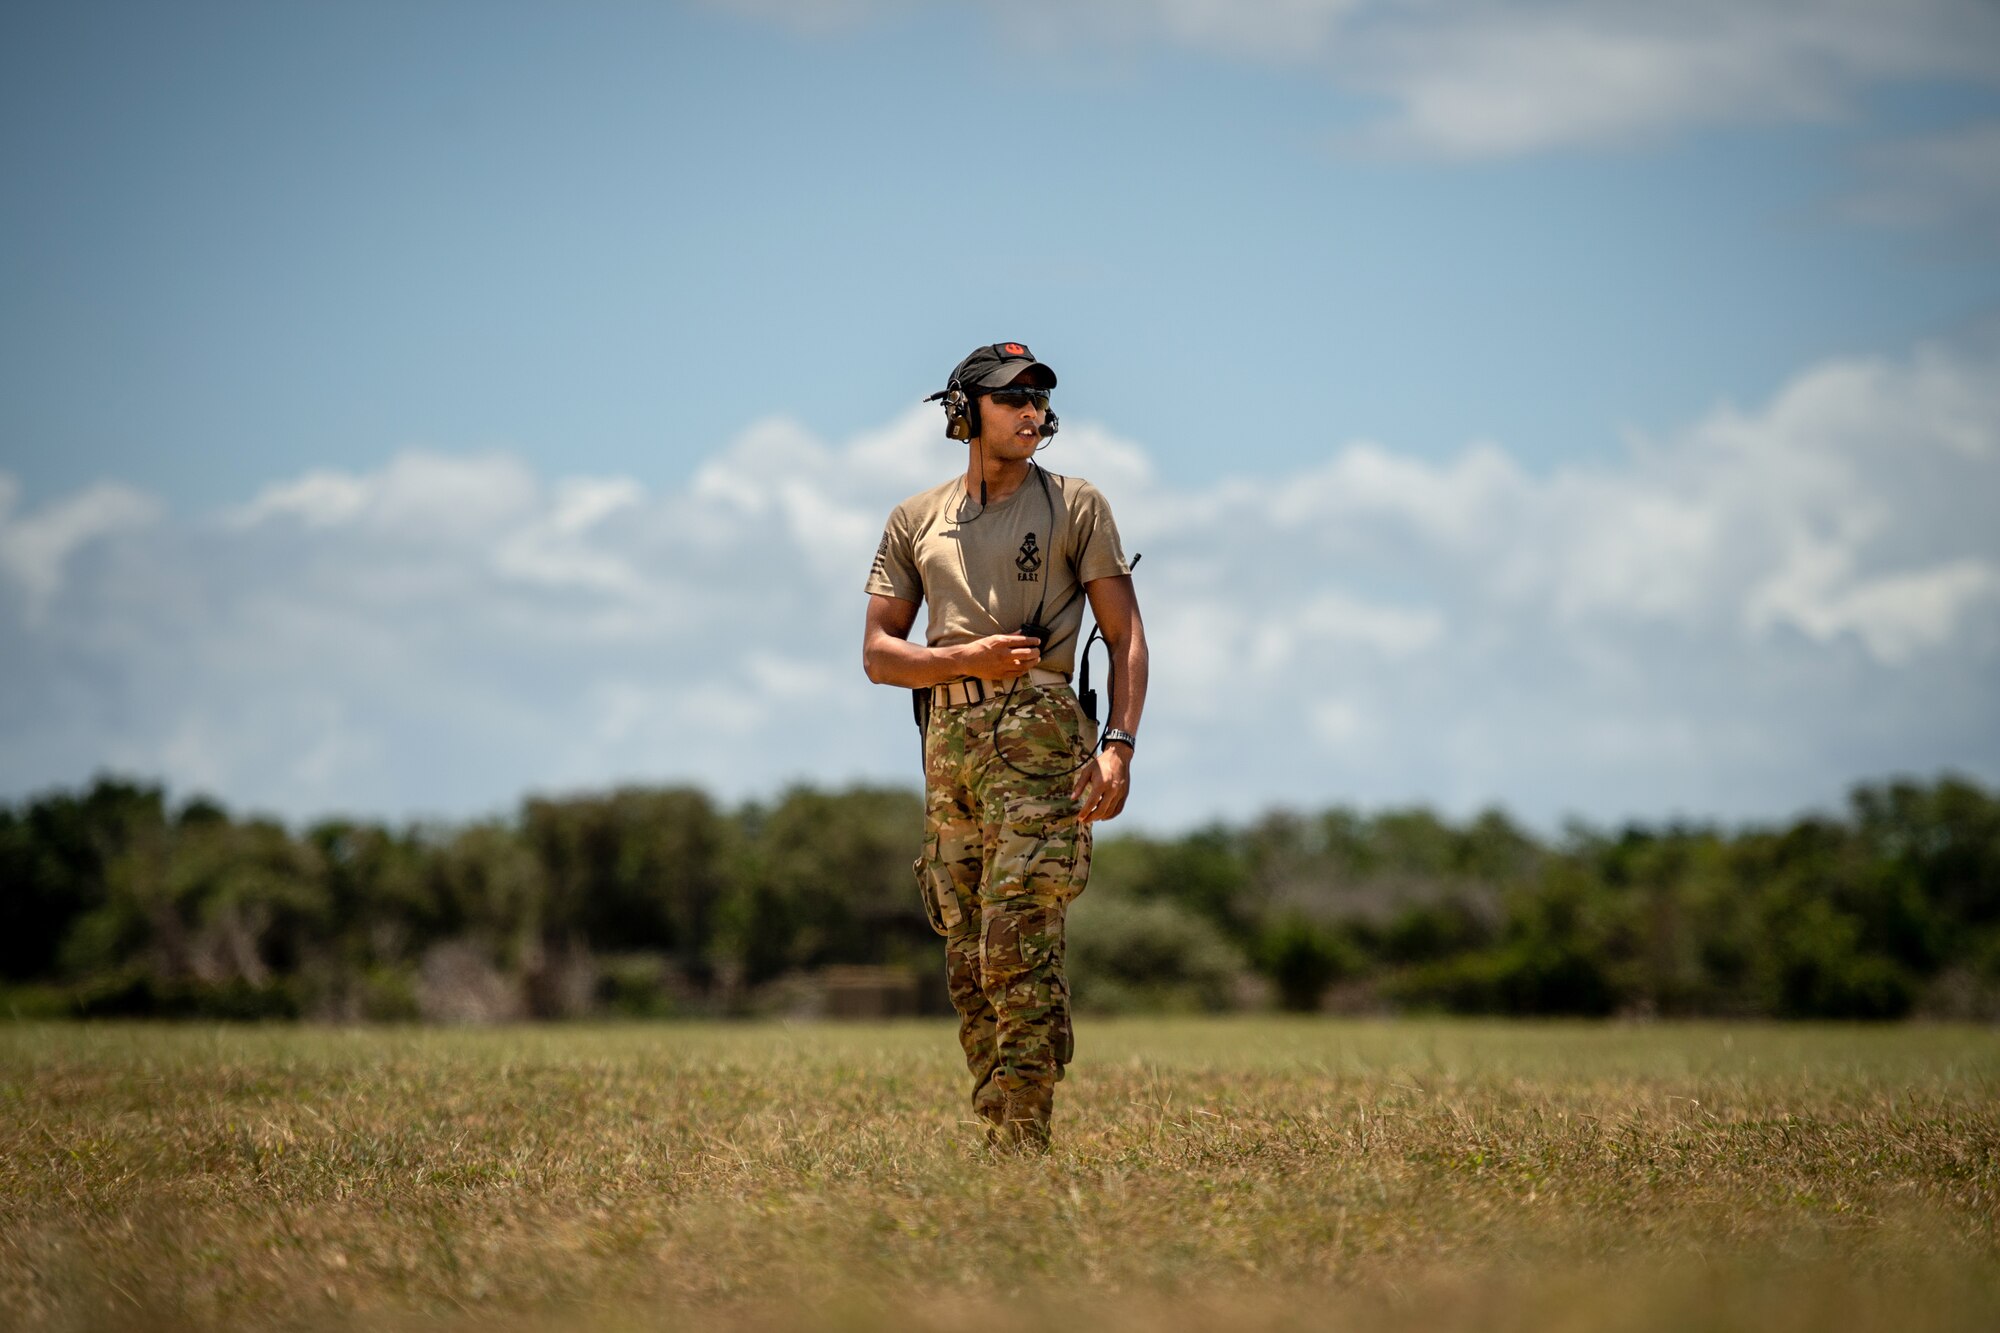 U.S. Army Private First Class Ponce De Leon Allen Camden, 2-113th Infantry fly away security member, pulls security for a 75th Expeditionary Airlift Squadron operation at Camp Simba, Kenya, Aug. 26, 2019. The Army unit travels with the 75th Expeditionary Airlift Squadron as a joint service effort to ensure the safety of Air Force assets during operations. (U.S. Air Force photo by Staff Sgt. Devin Boyer)